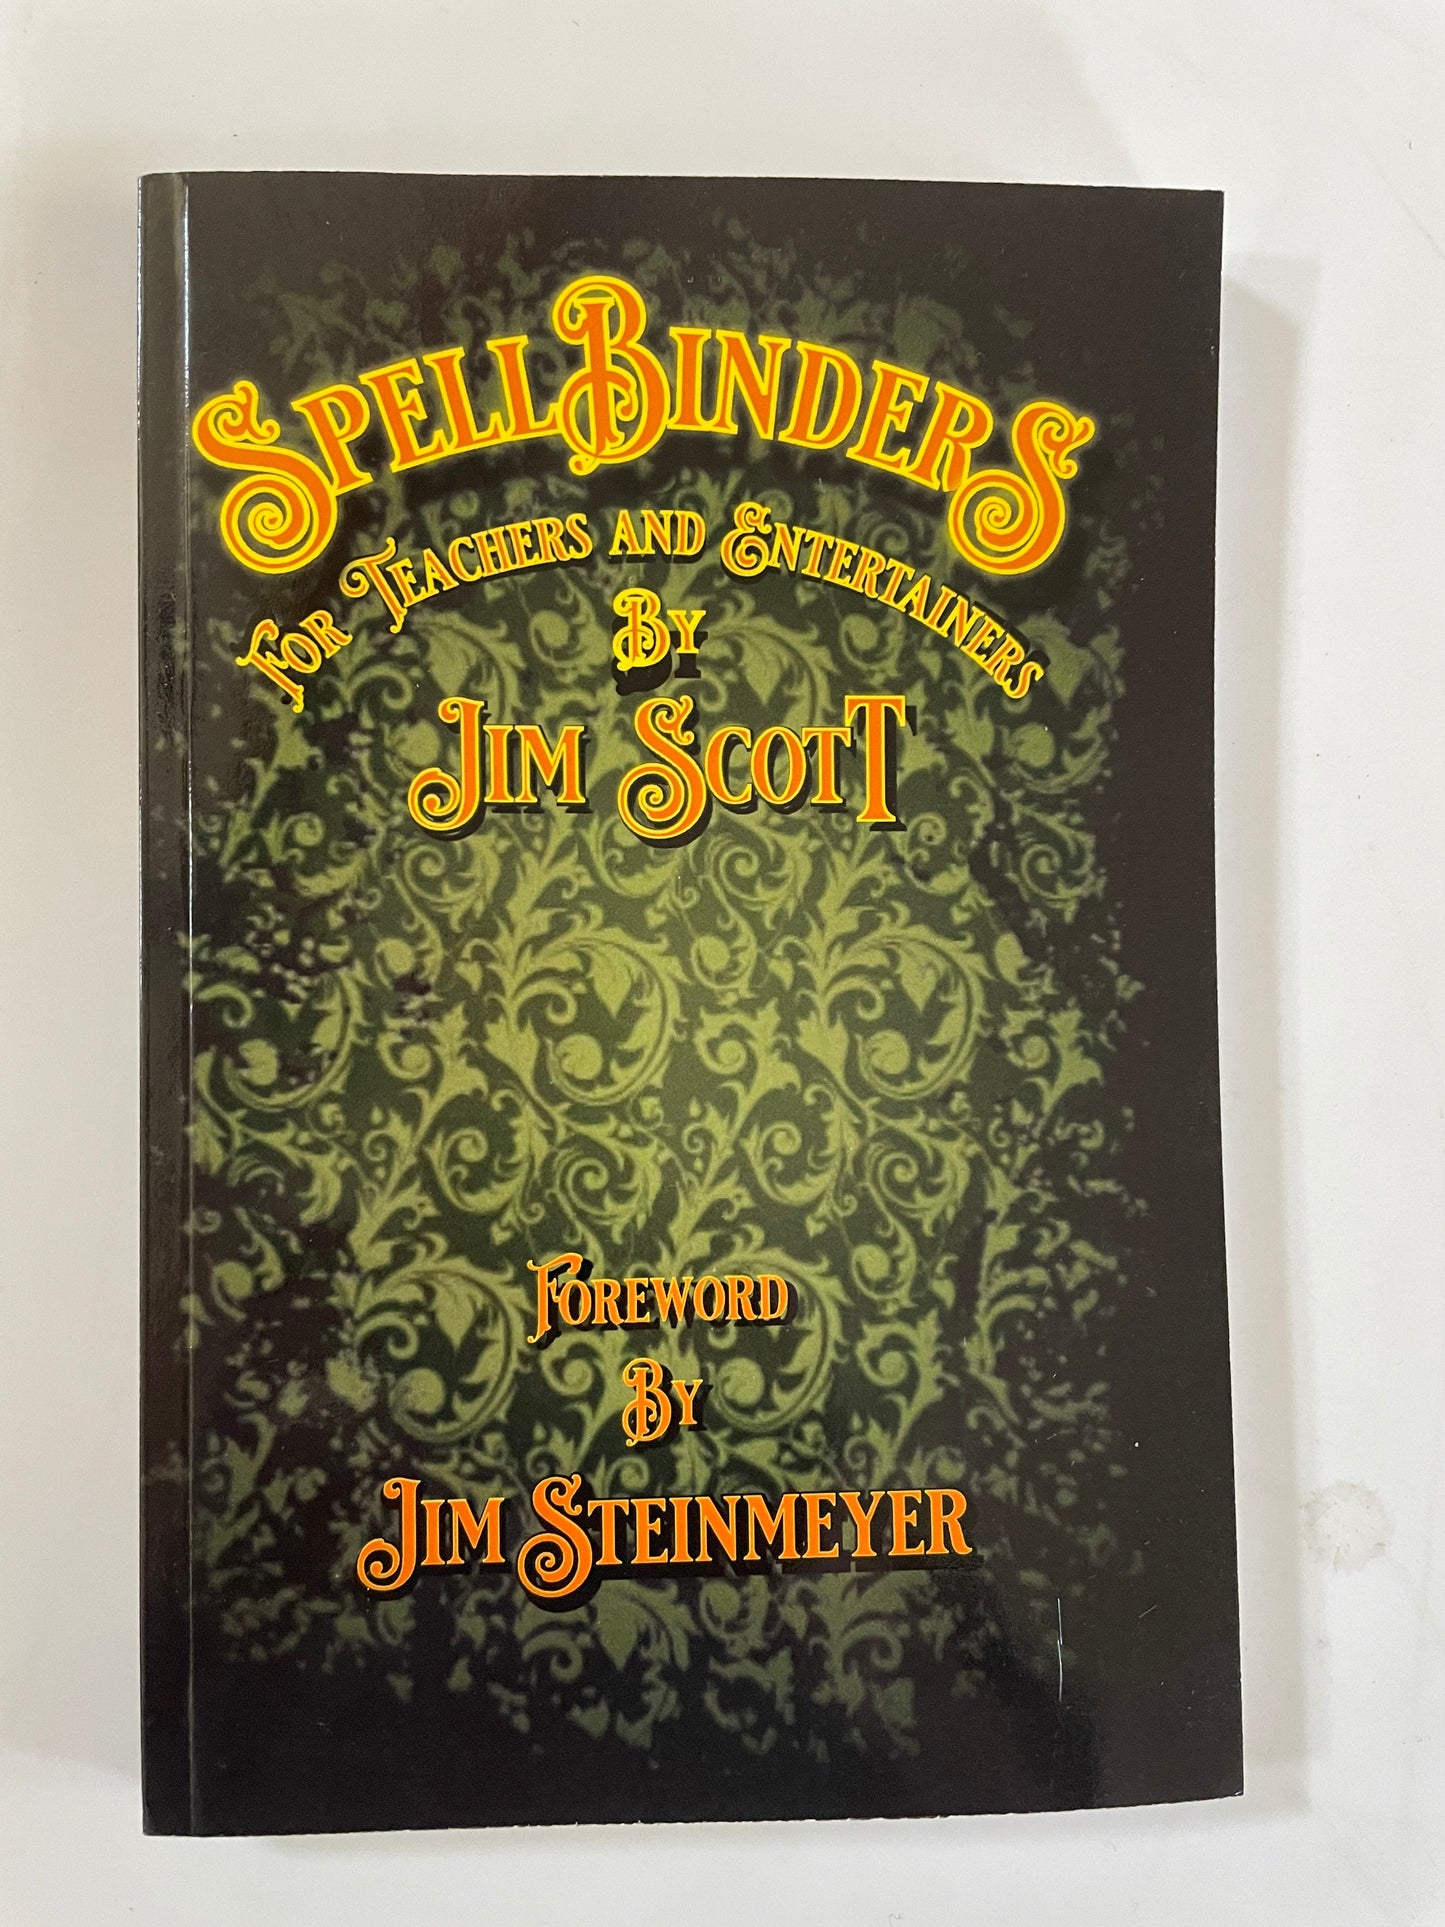 Spell Binders For Teachers and Entertainers- Jim Scott